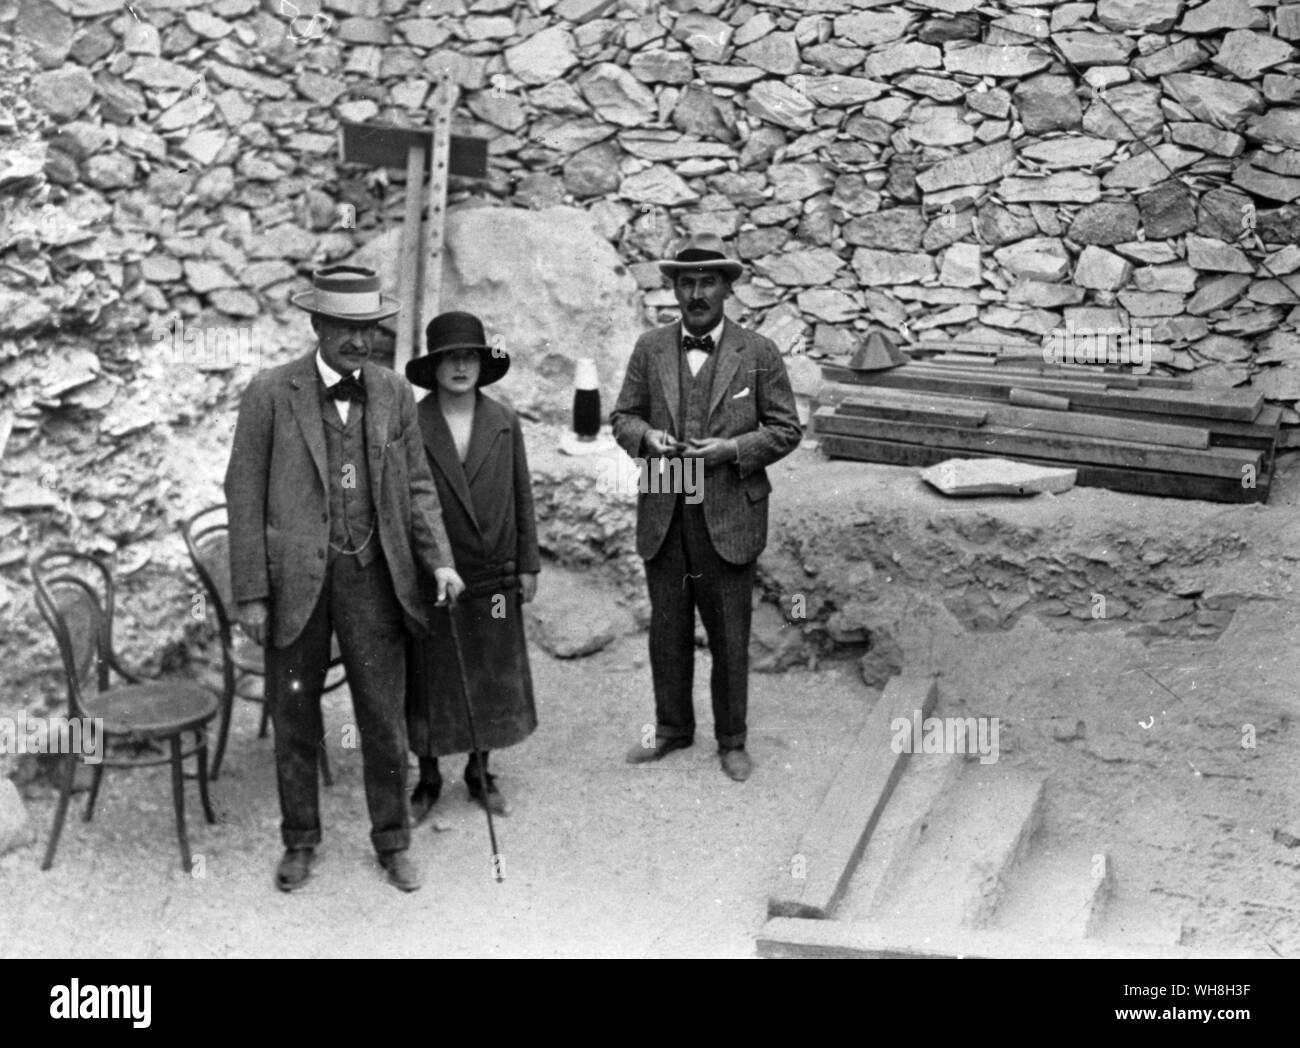 Lord Carnarvon, Lady Evelyn Herbert and Mr Howard Carter at the Entrance to the Tomb of Tutankhamen. The Treasures of Tutankhamen, The Exhibition Catalogue by I E S Edwards, page 26. Stock Photo